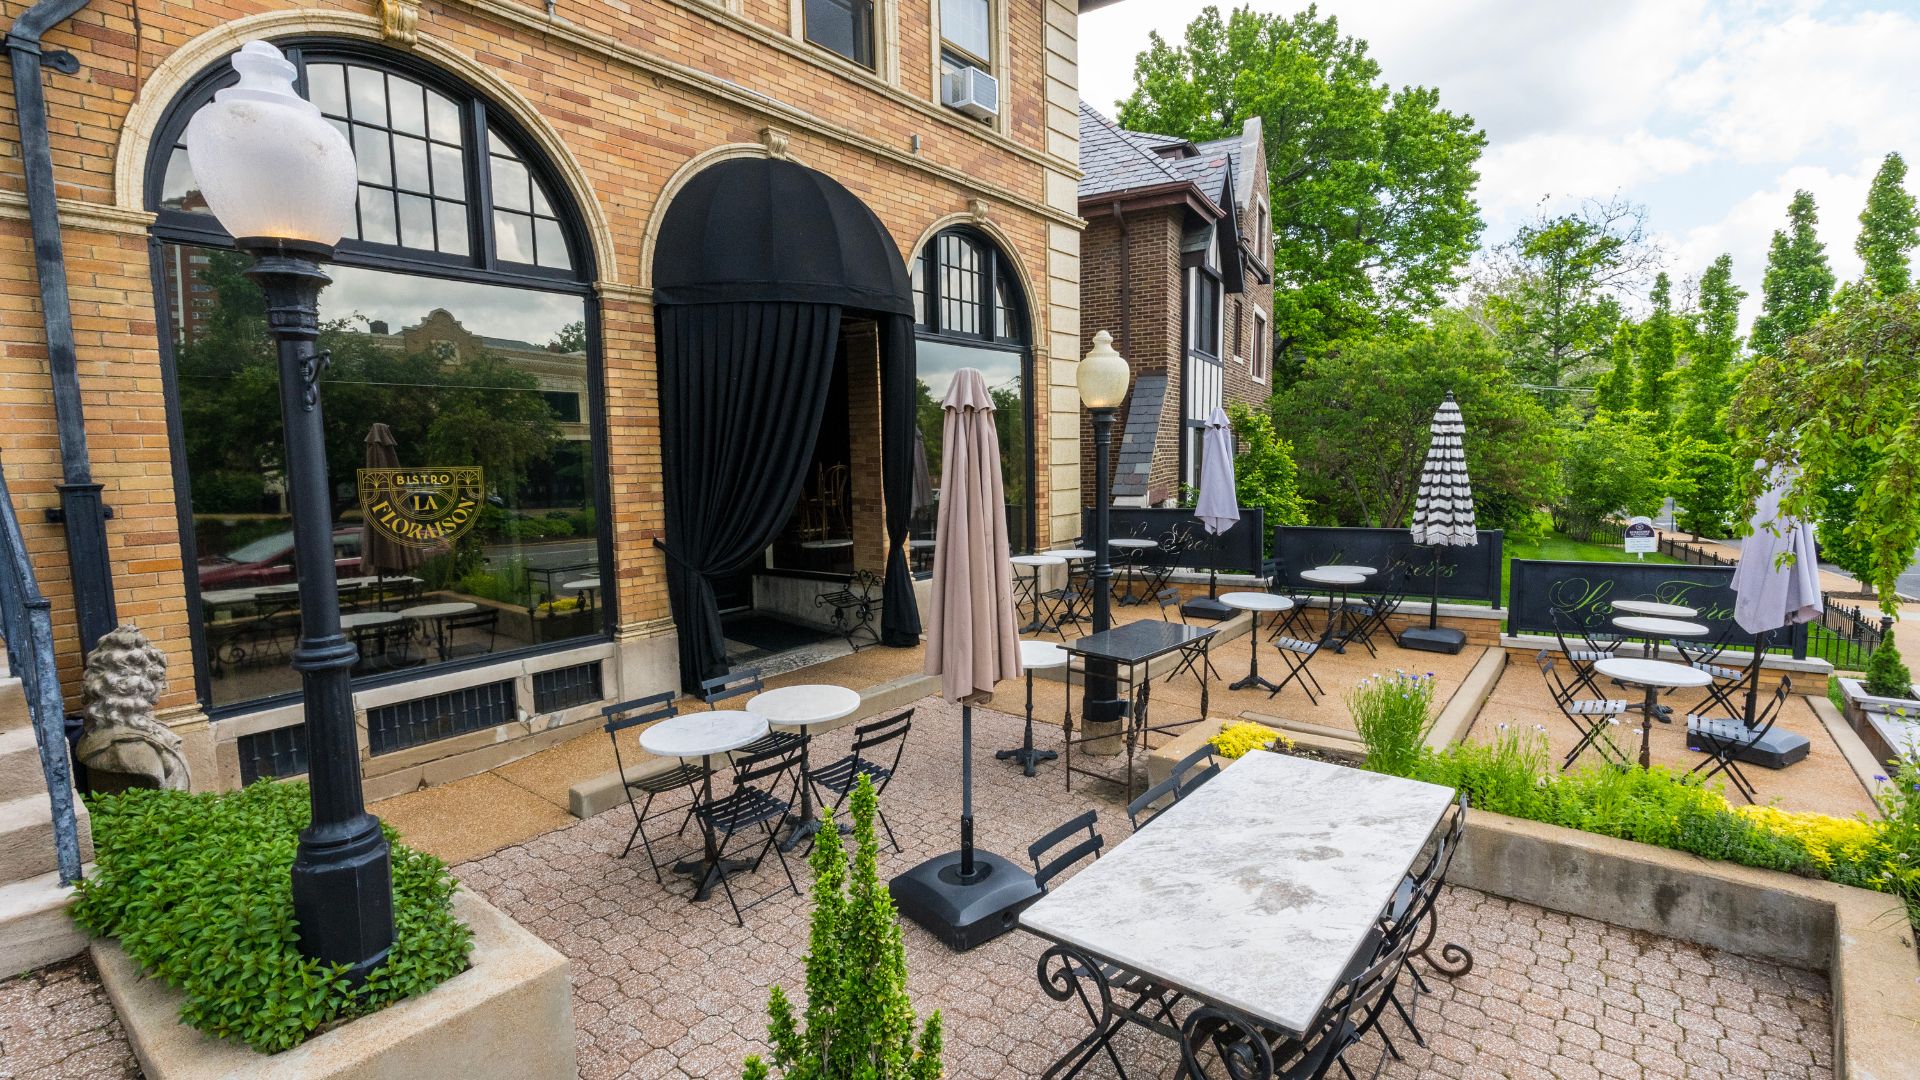 The patio at Bistro La Floraison transports diners to France.